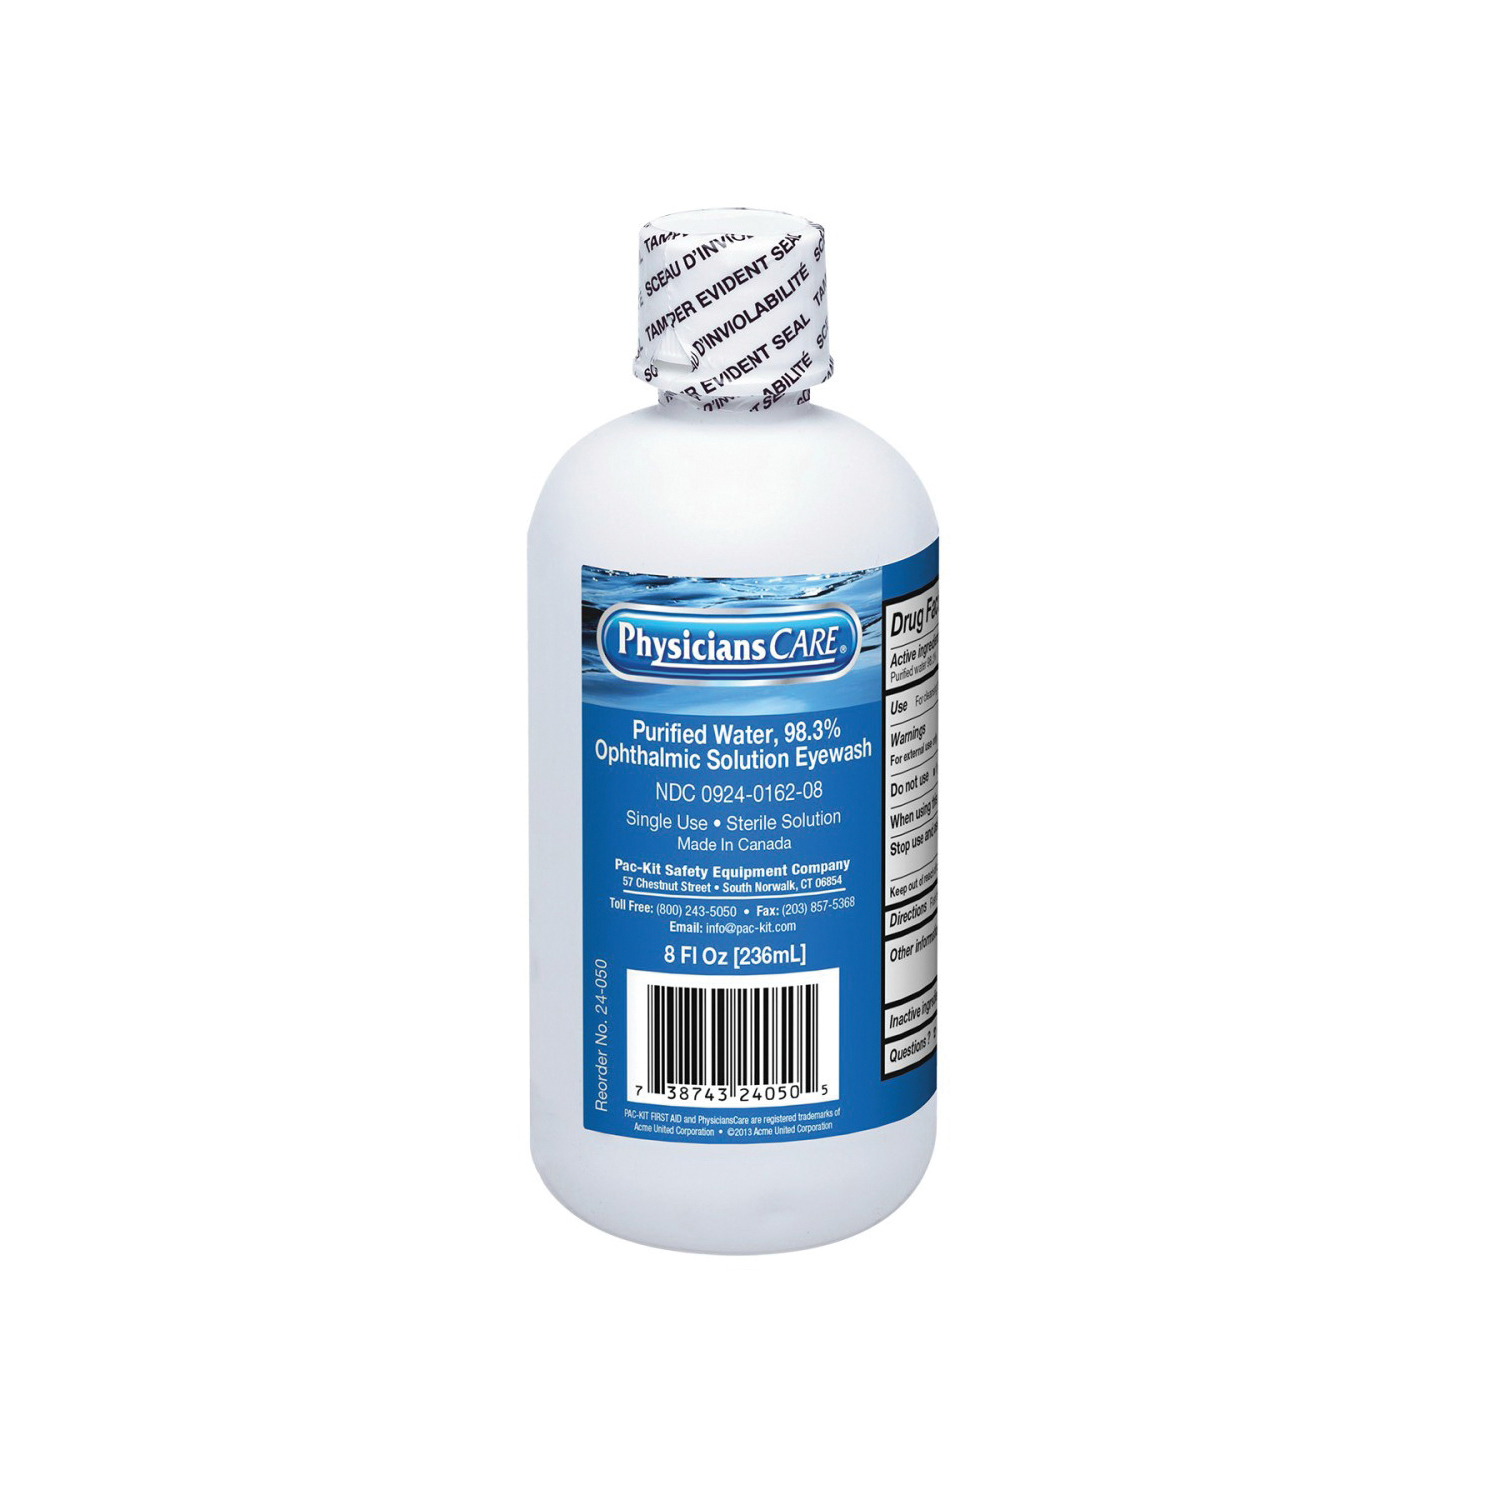 Spintec® 107-371 Eyewash Dust Cap, For Use With 2P267, 2P332, 3NY86, 4R959, 4R961, 4R975, 4R983, 4YF97, 4T003, 4T004, 4T008, 4T009, 4T012, 6T549, 3DUT4 and 3DUT5 Eyewash Station, Specifications Met: ANSI Z358.1-2009, SEI Certified